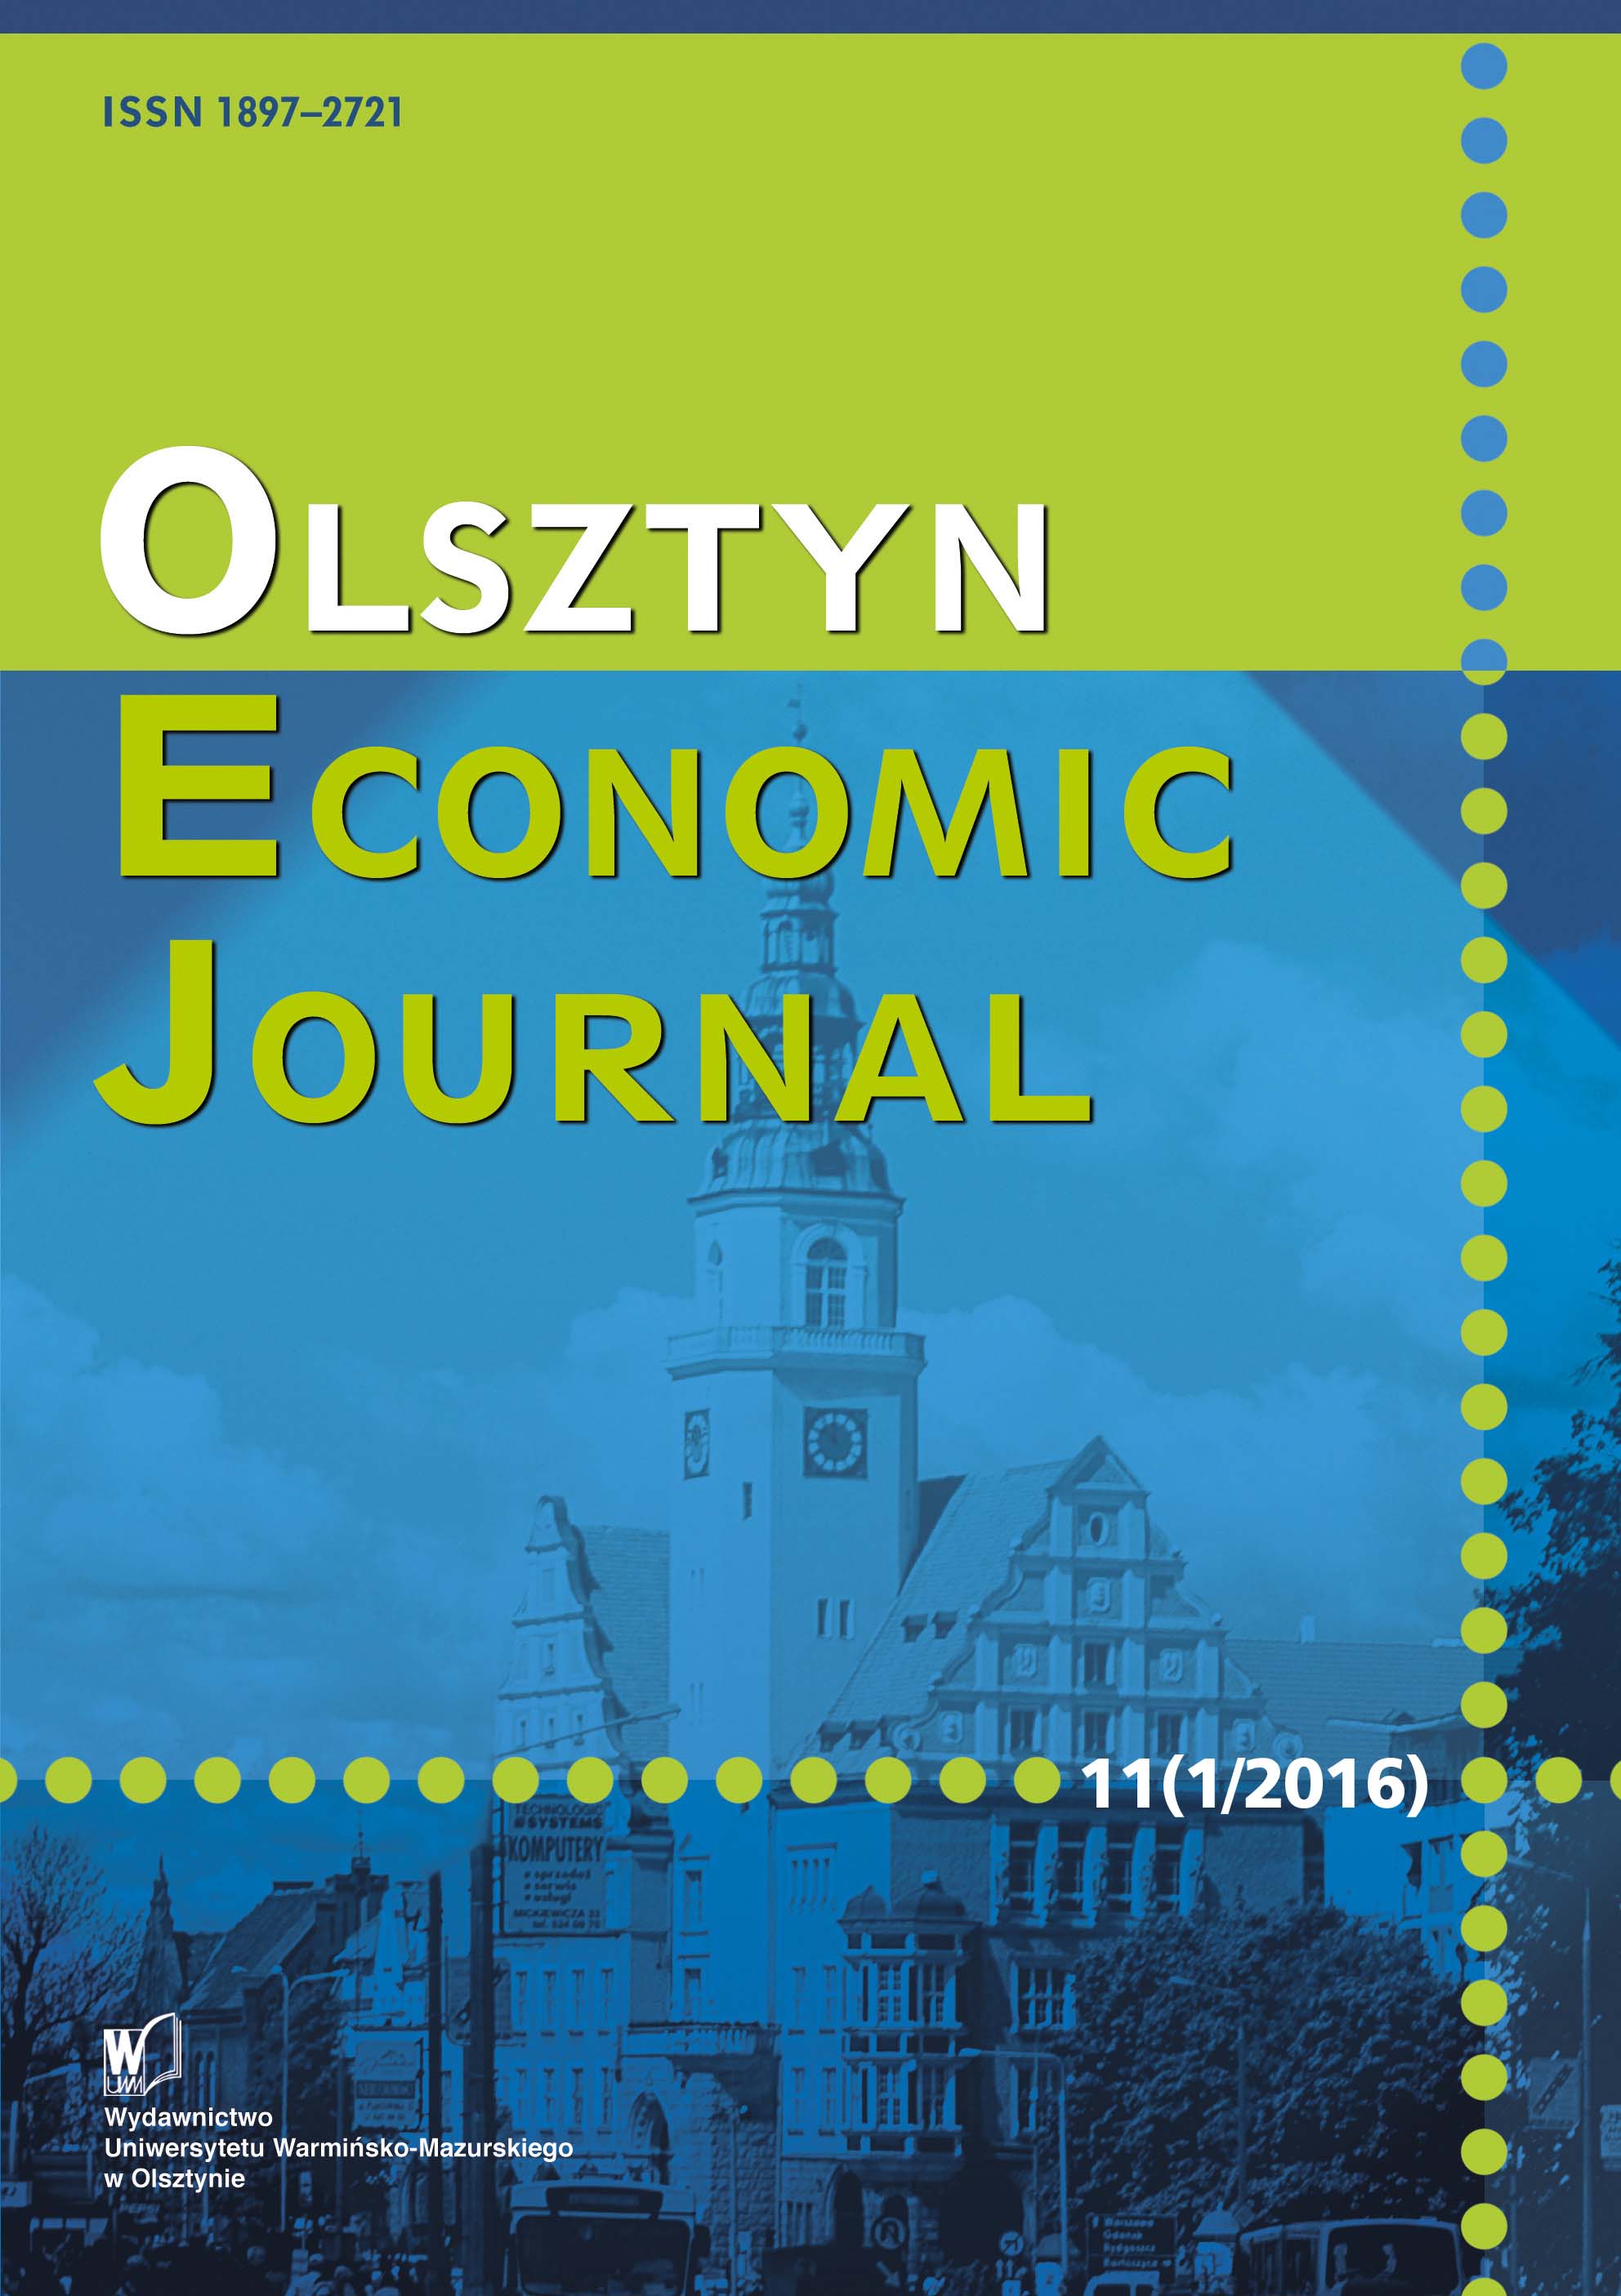 Assessment of Innovation Gap between Poland and European Union Countries